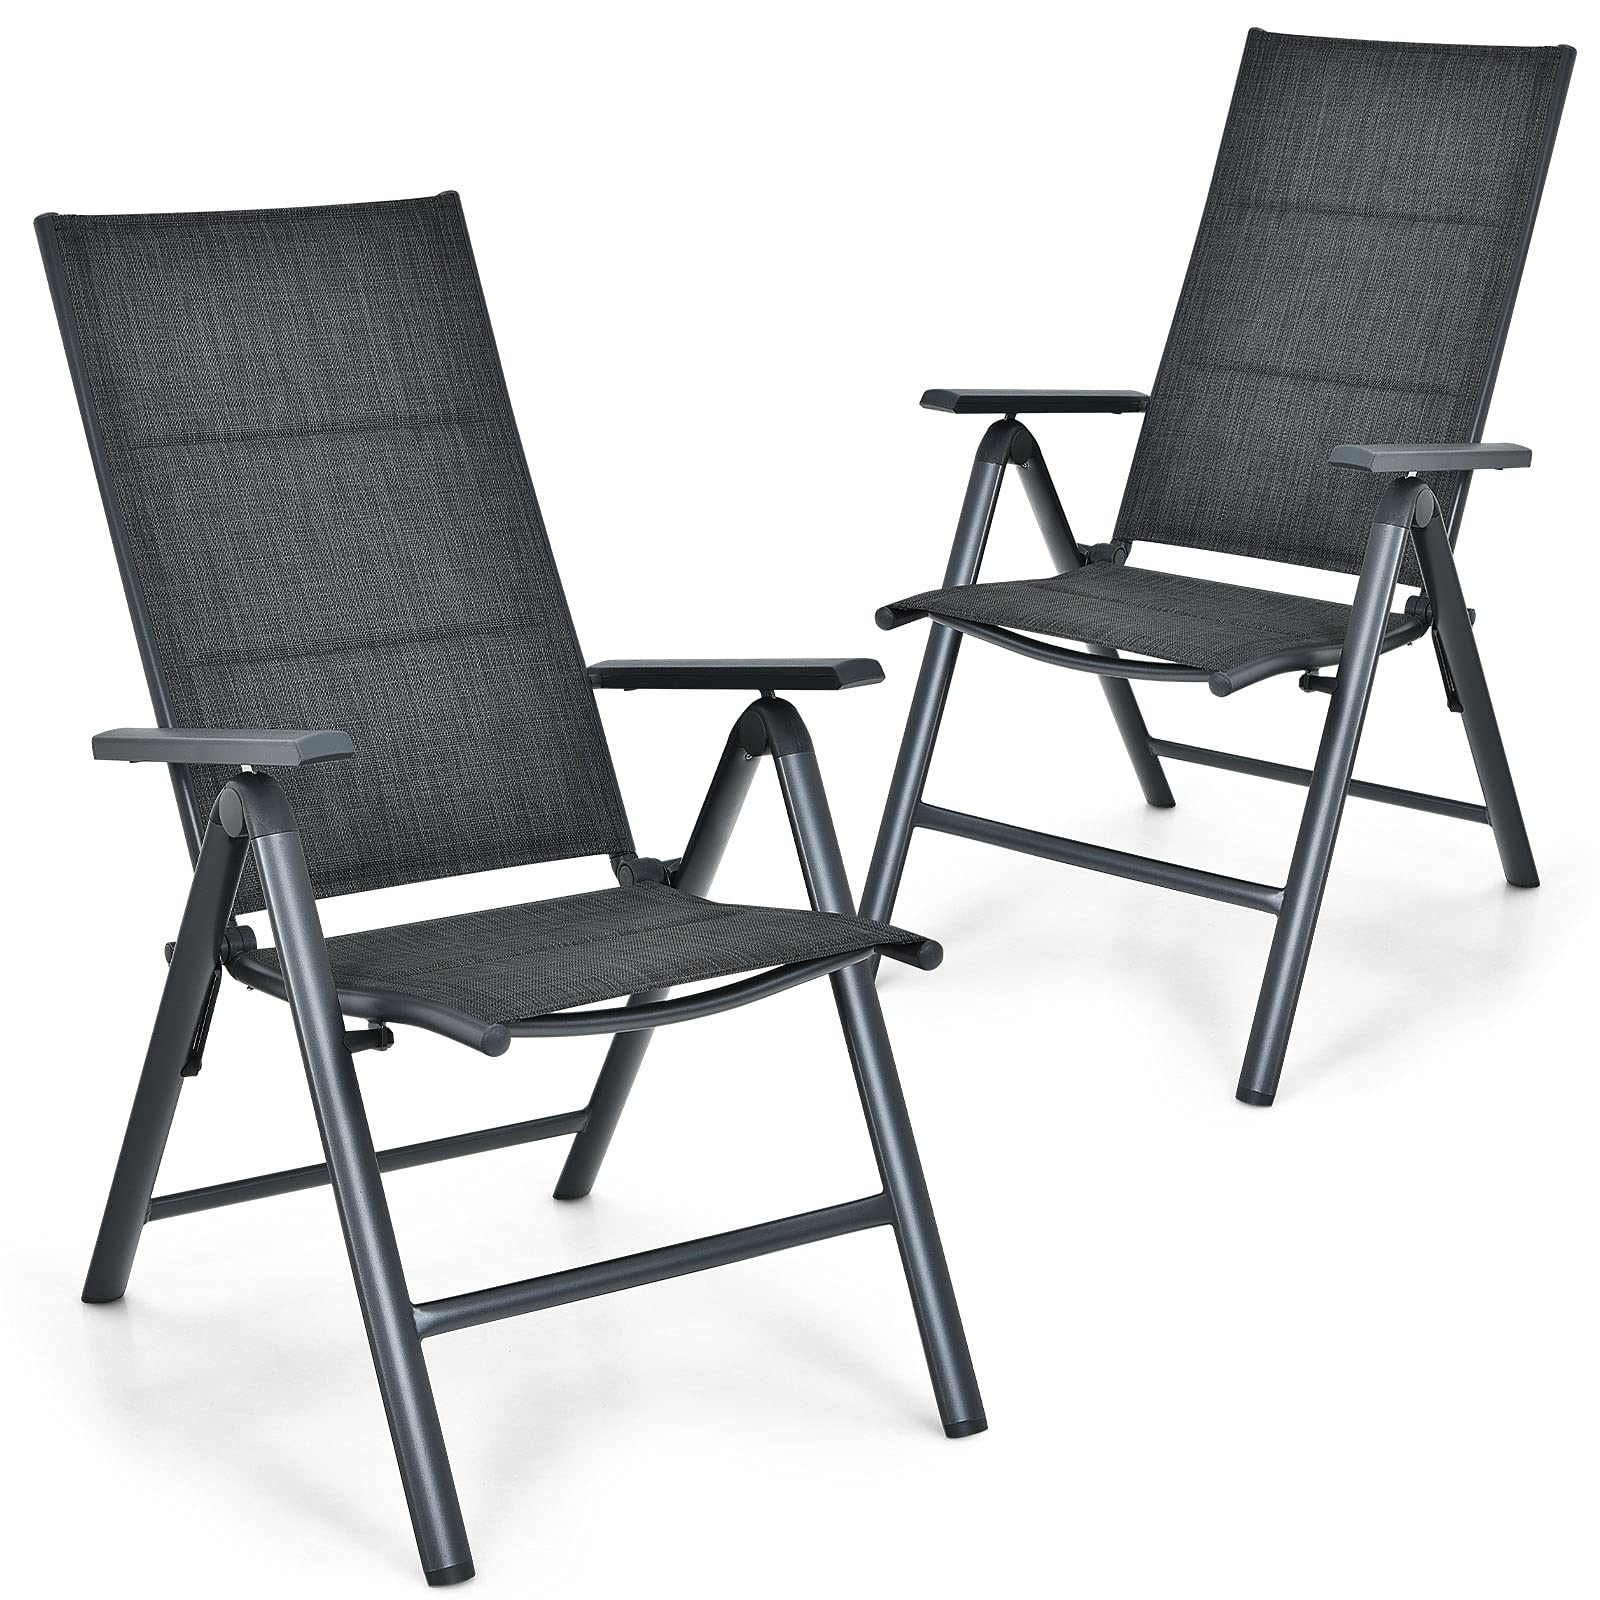 Giantex Padded Lawn Chairs 7 Positions Adjustable Backrest Aluminum Frame